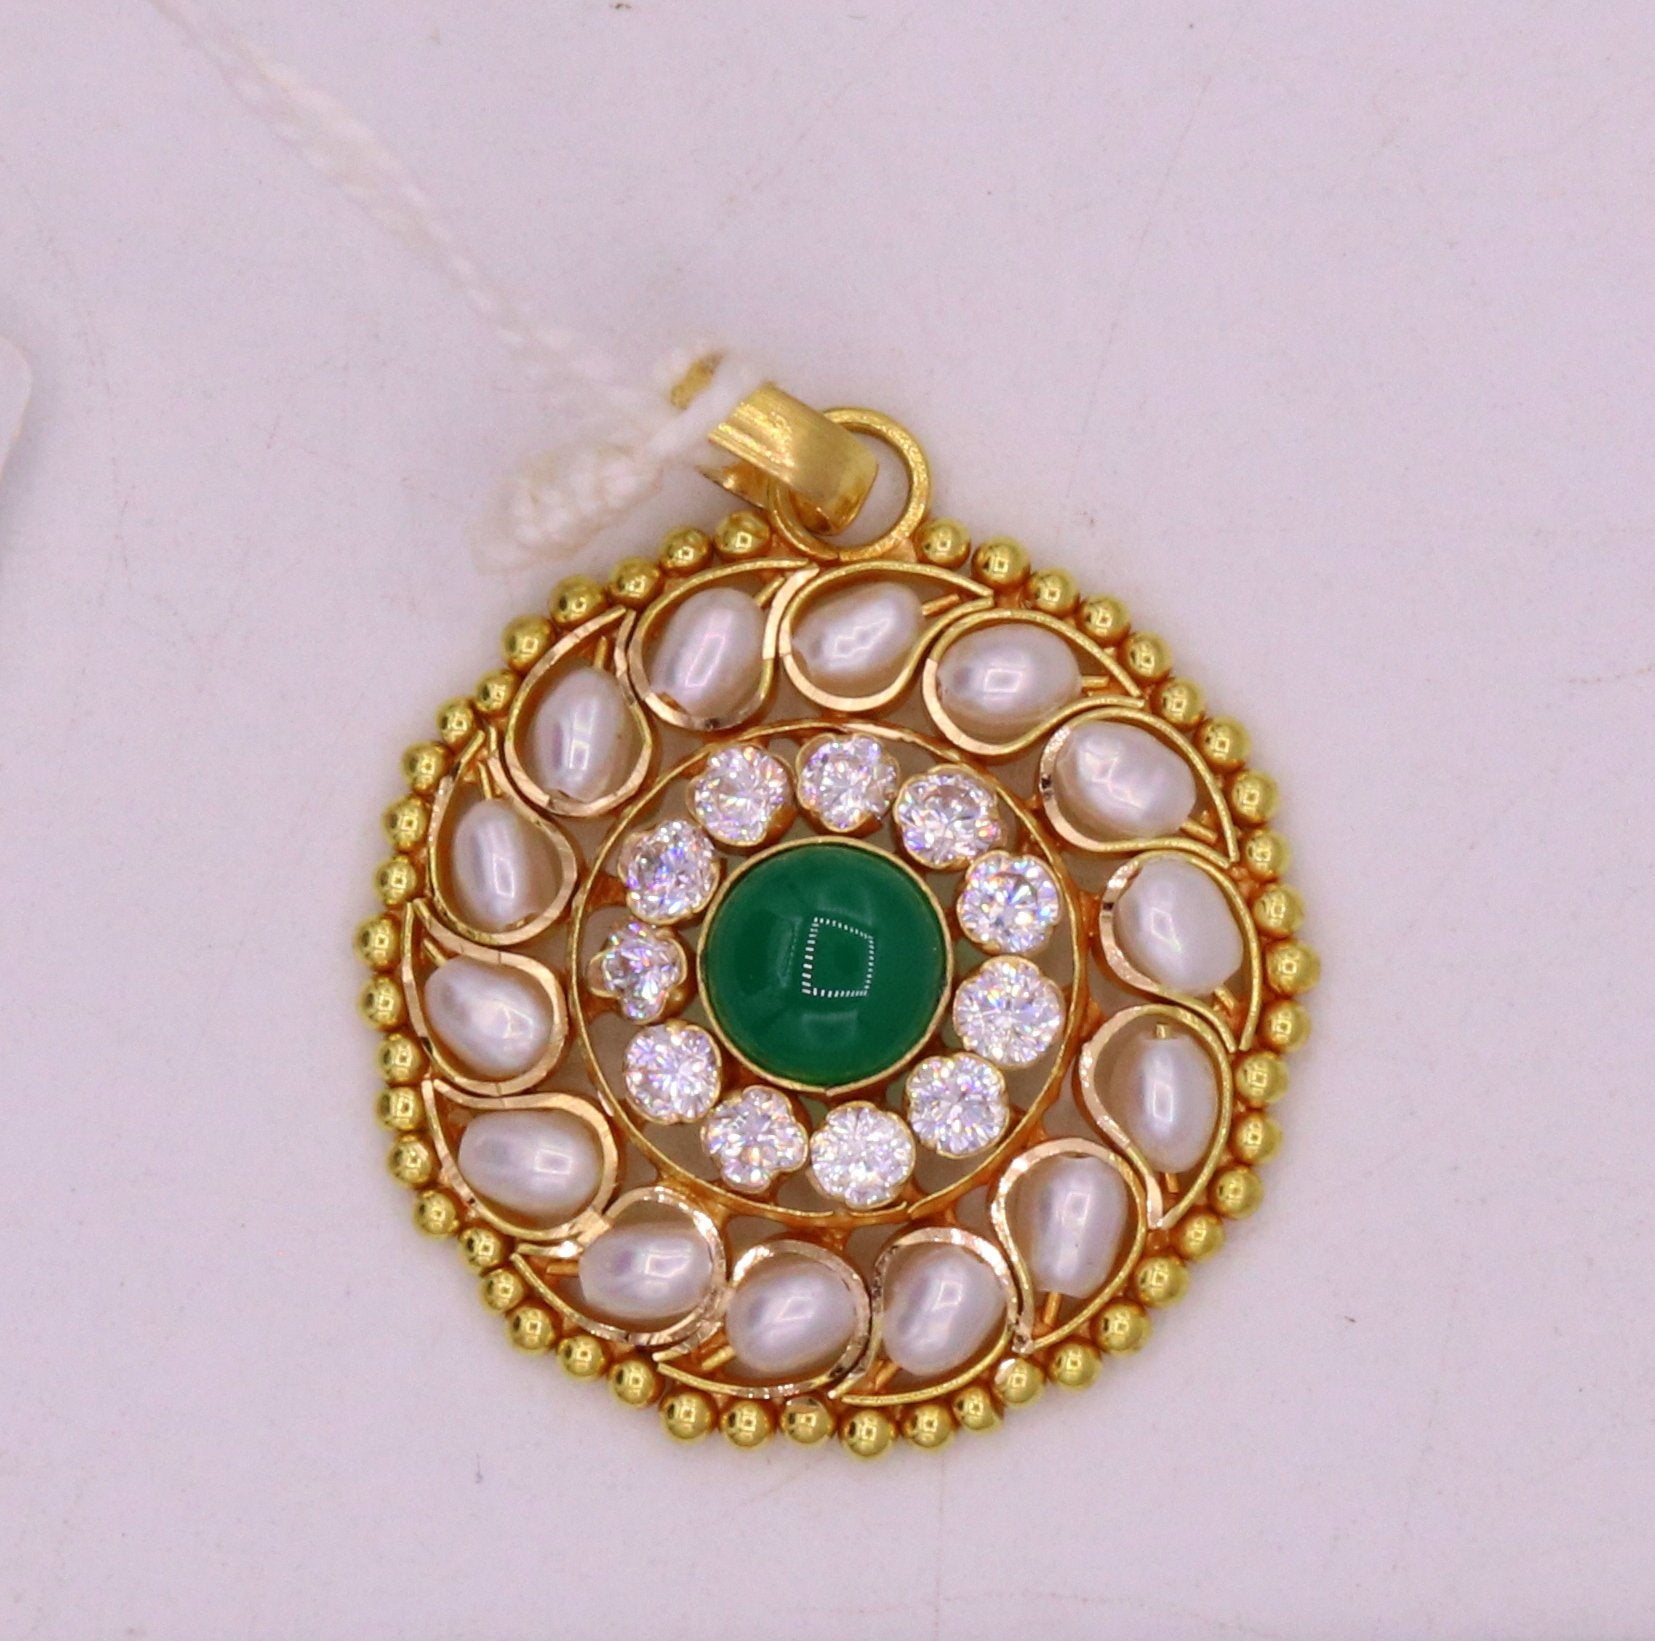 Traditional designer vintage handmade 22k yellow gold real white pearl jadau green color stone fabulous pendant necklace Indian jewelry - TRIBAL ORNAMENTS